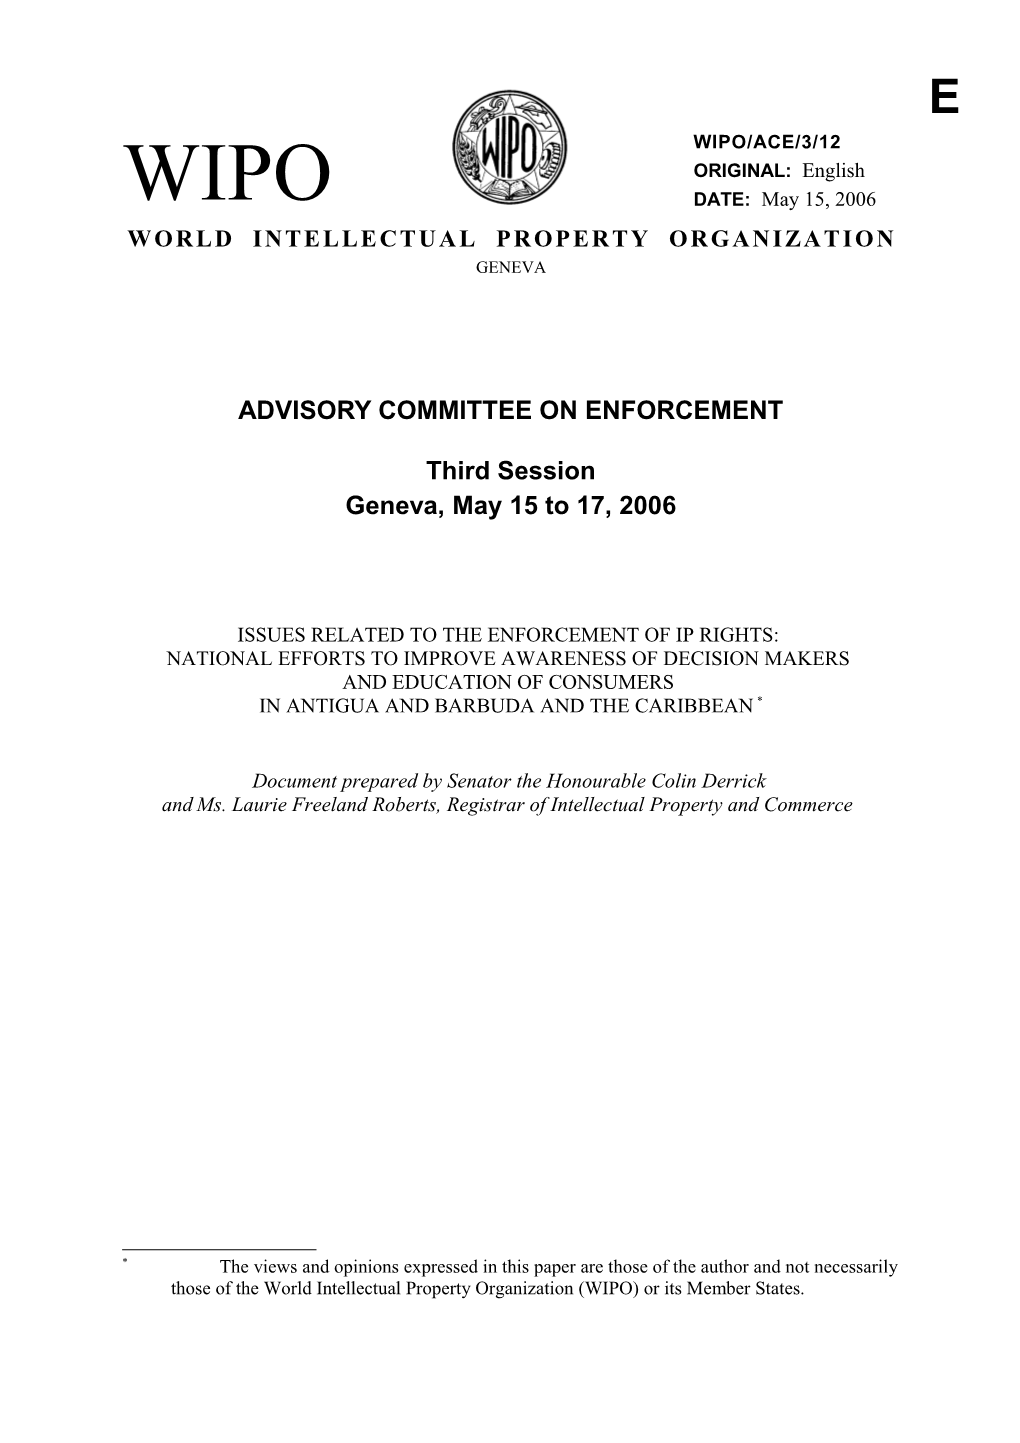 WIPO/ACE/3/12: Issues Related to the Enforcement of IP Rights: National Efforts to Improve